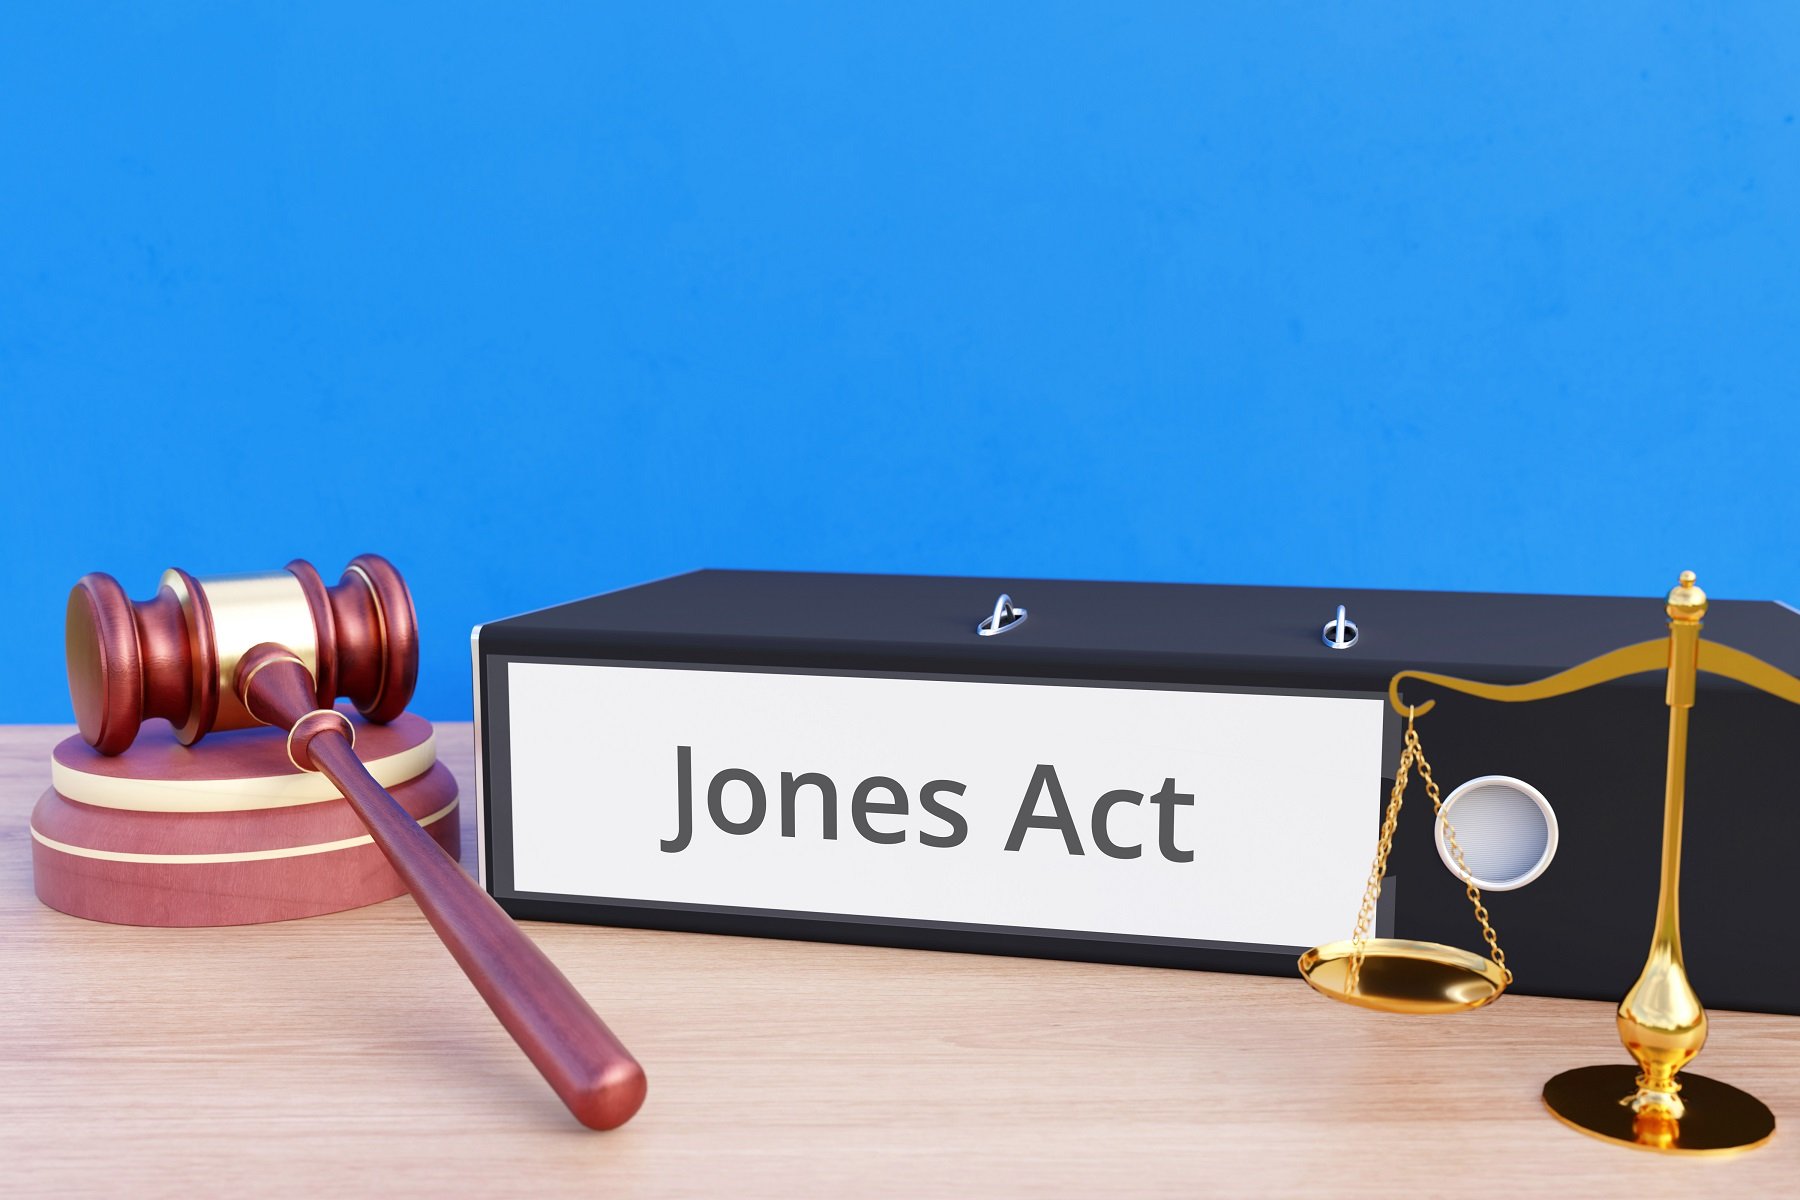 Jones Act – Folder with labeling, gavel and libra